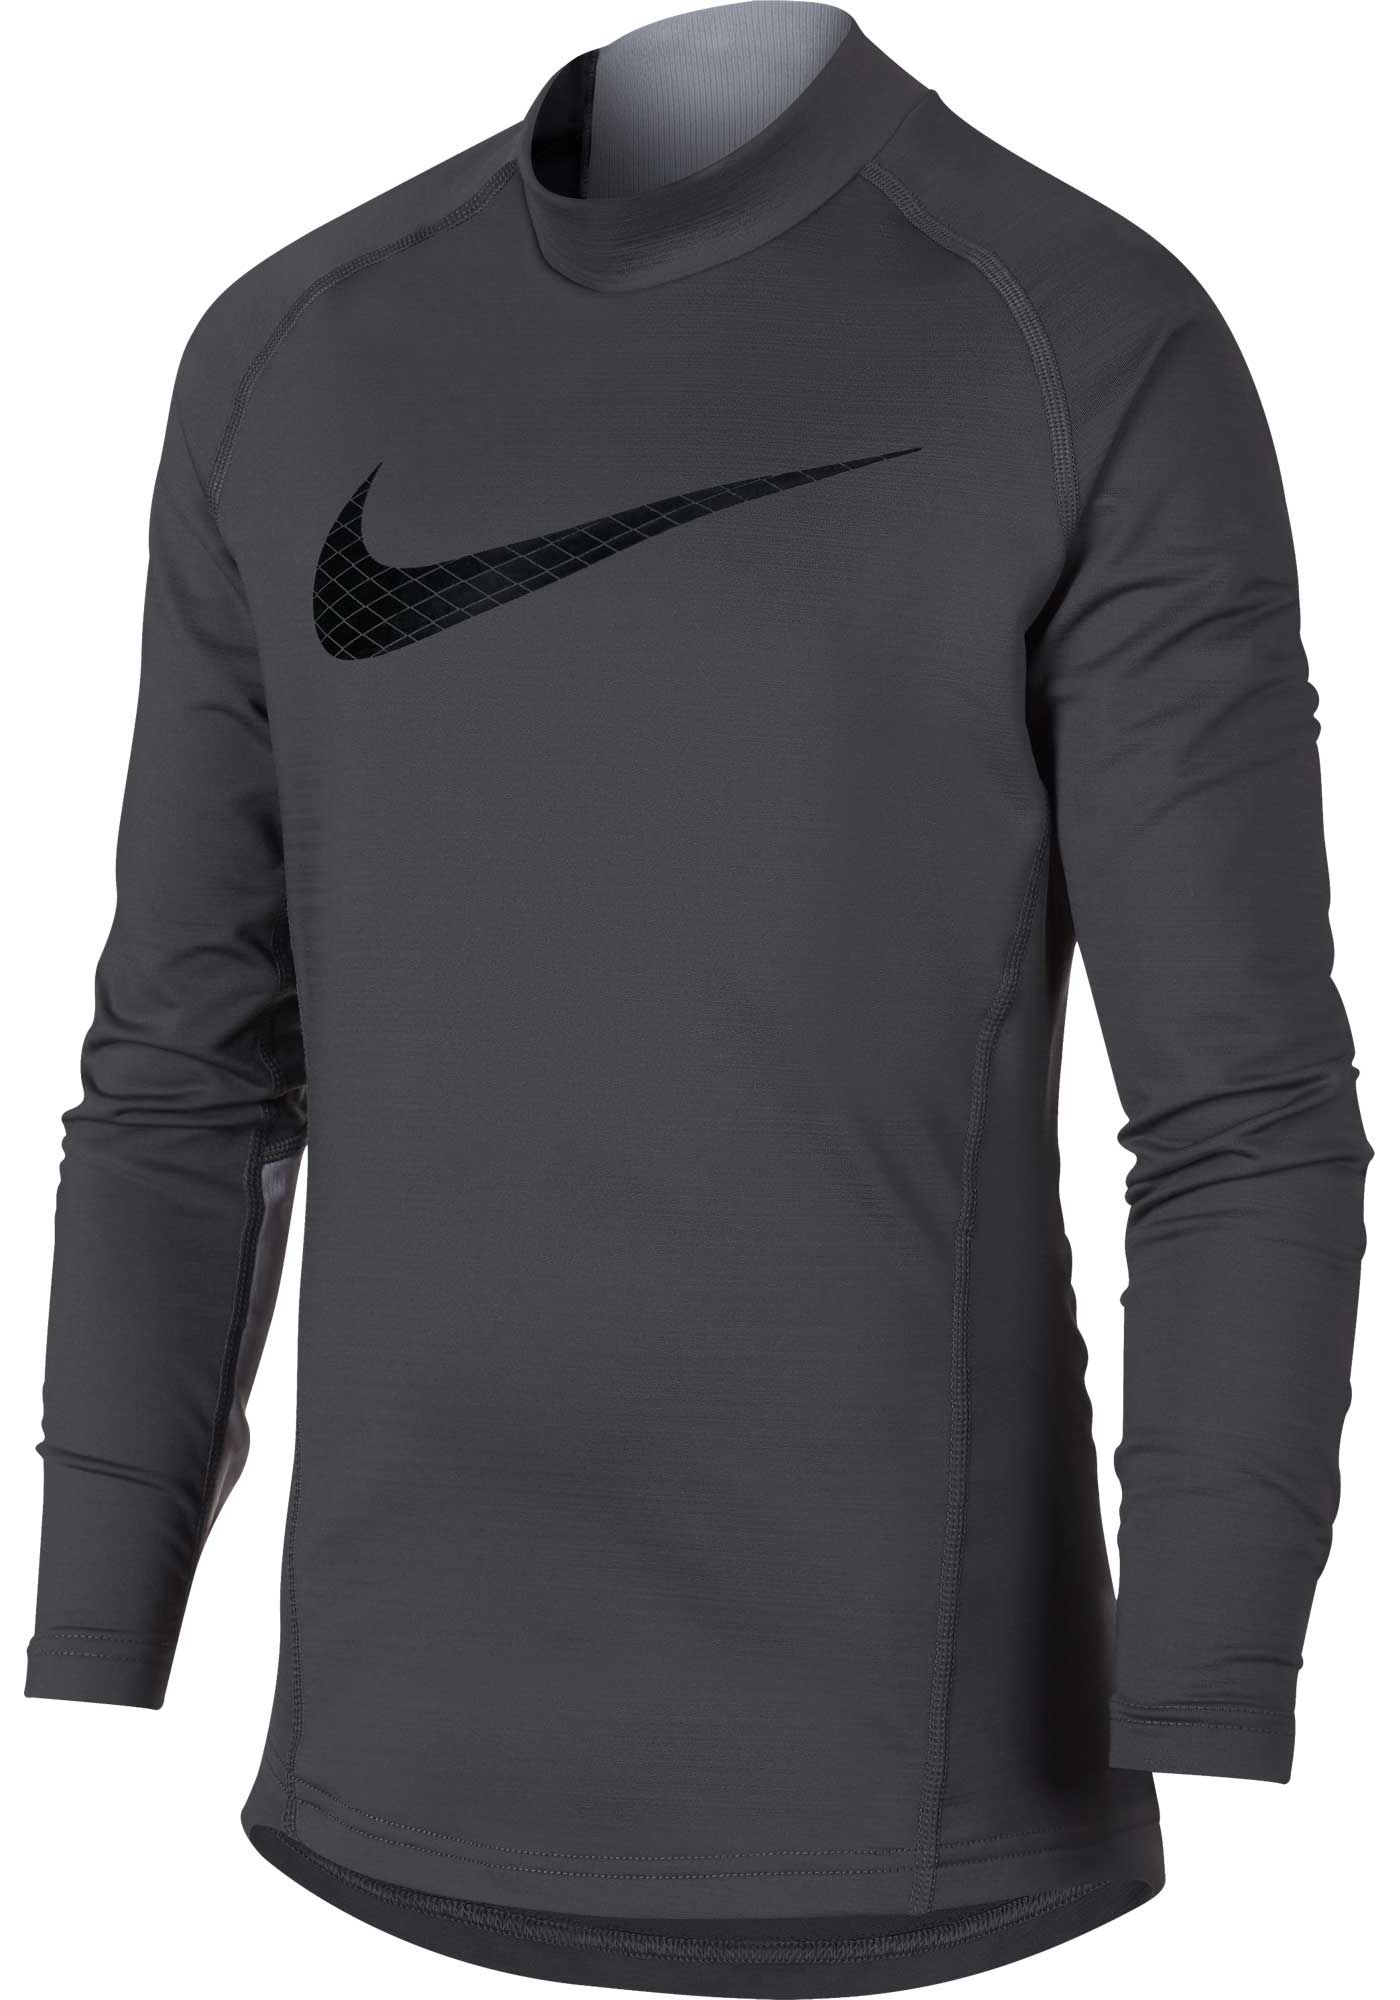 Download Nike Boys' Dri-FIT Mock Neck Compression Shirt | DICK'S Sporting Goods